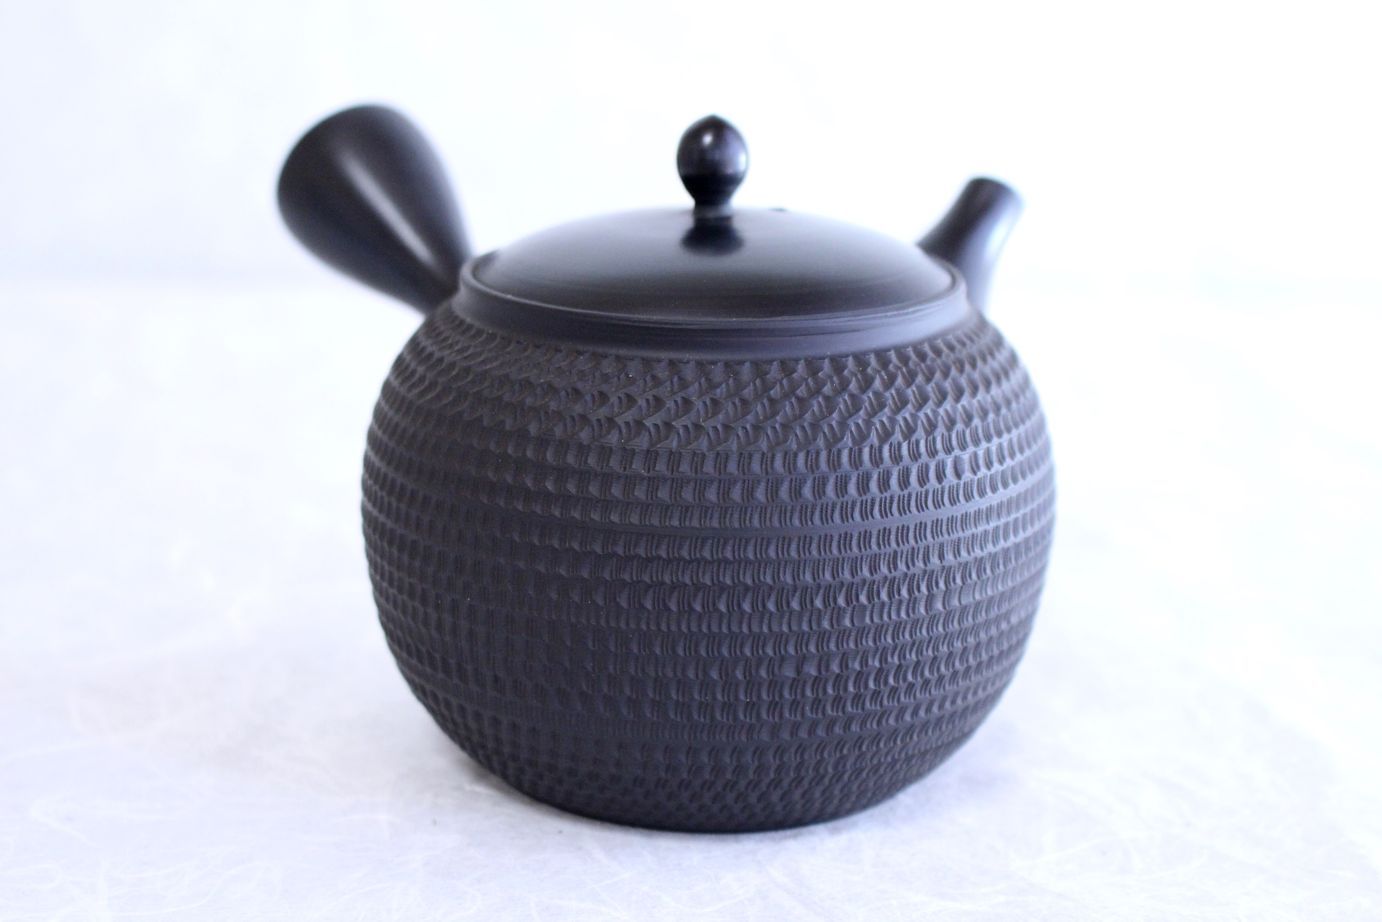 Japanese Kyusu Tea Pot with Infuser and Lid - Capacity 350ML - Black –  AHX-Life